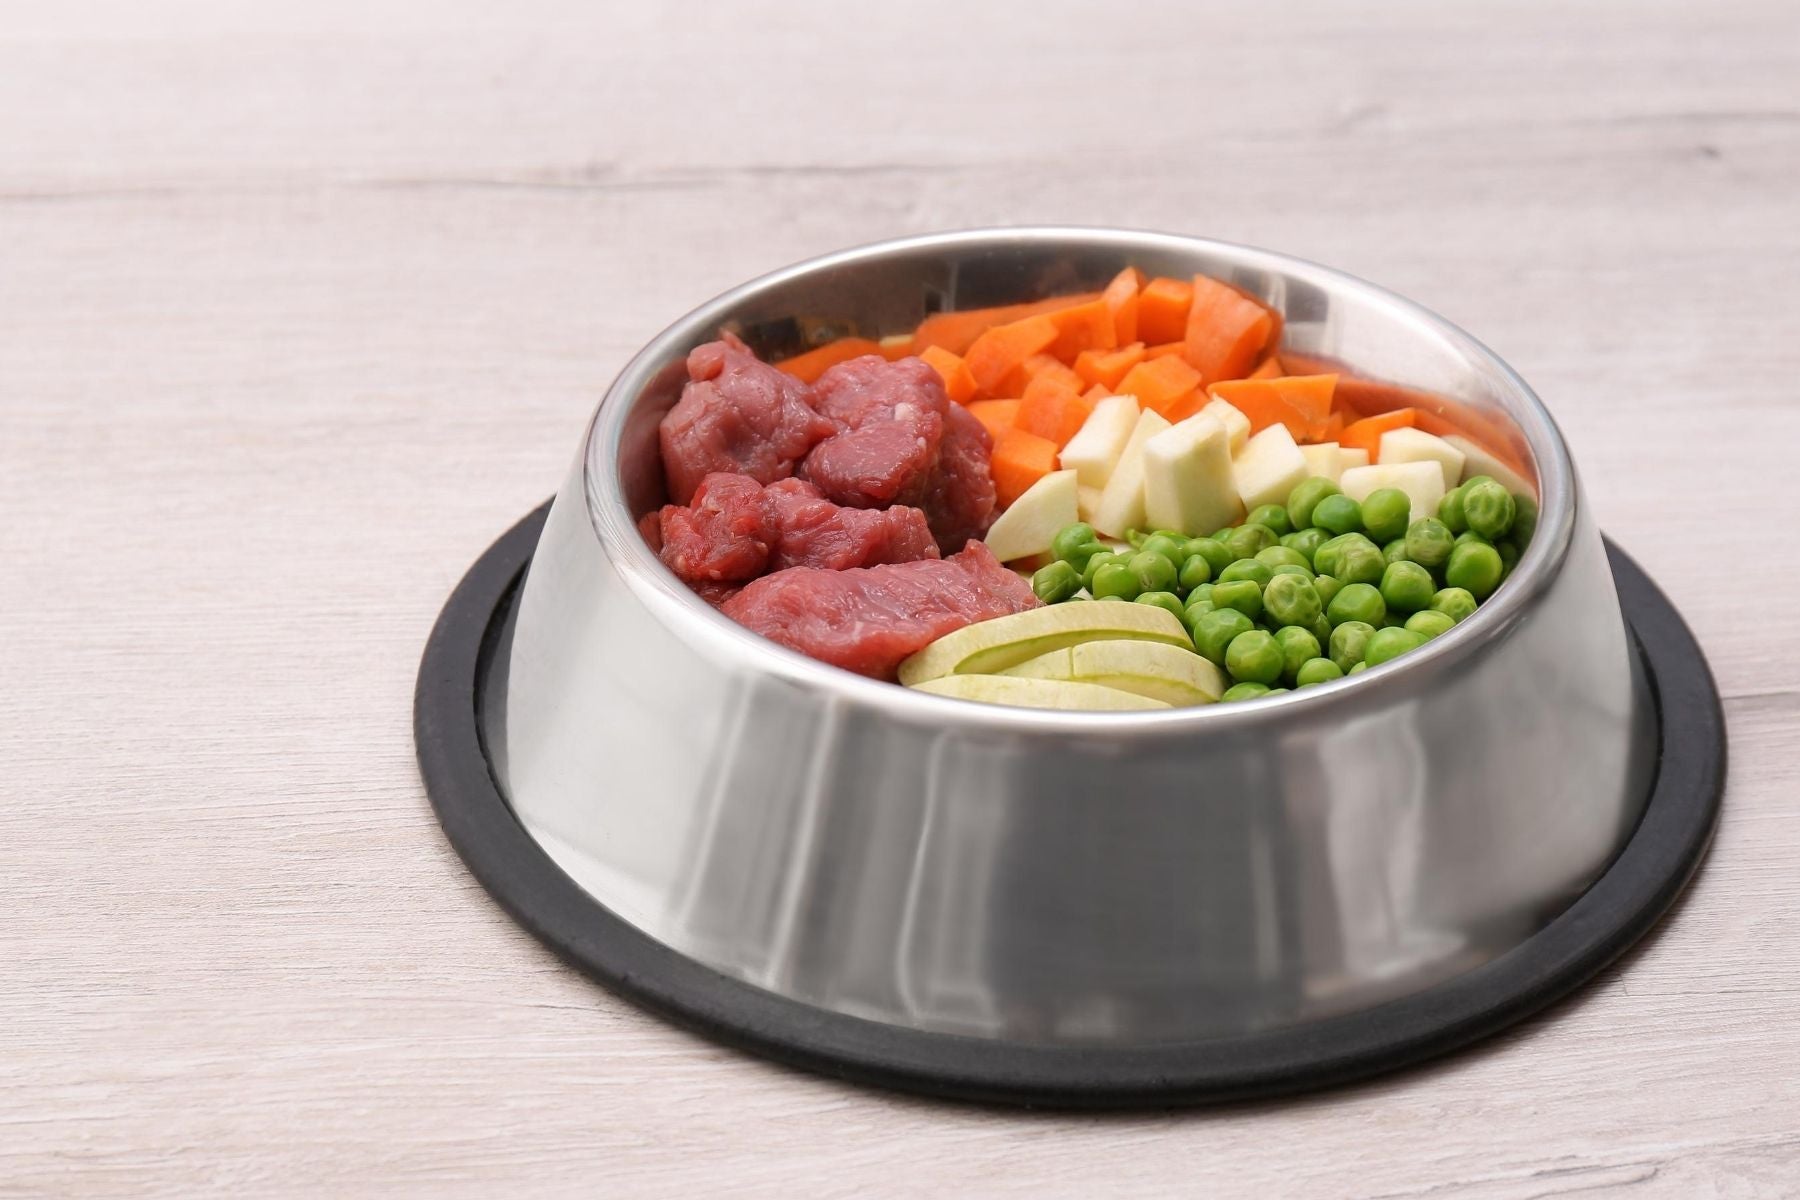 Meat and vegetables for homemade dog food dinner wellbeing for dogs